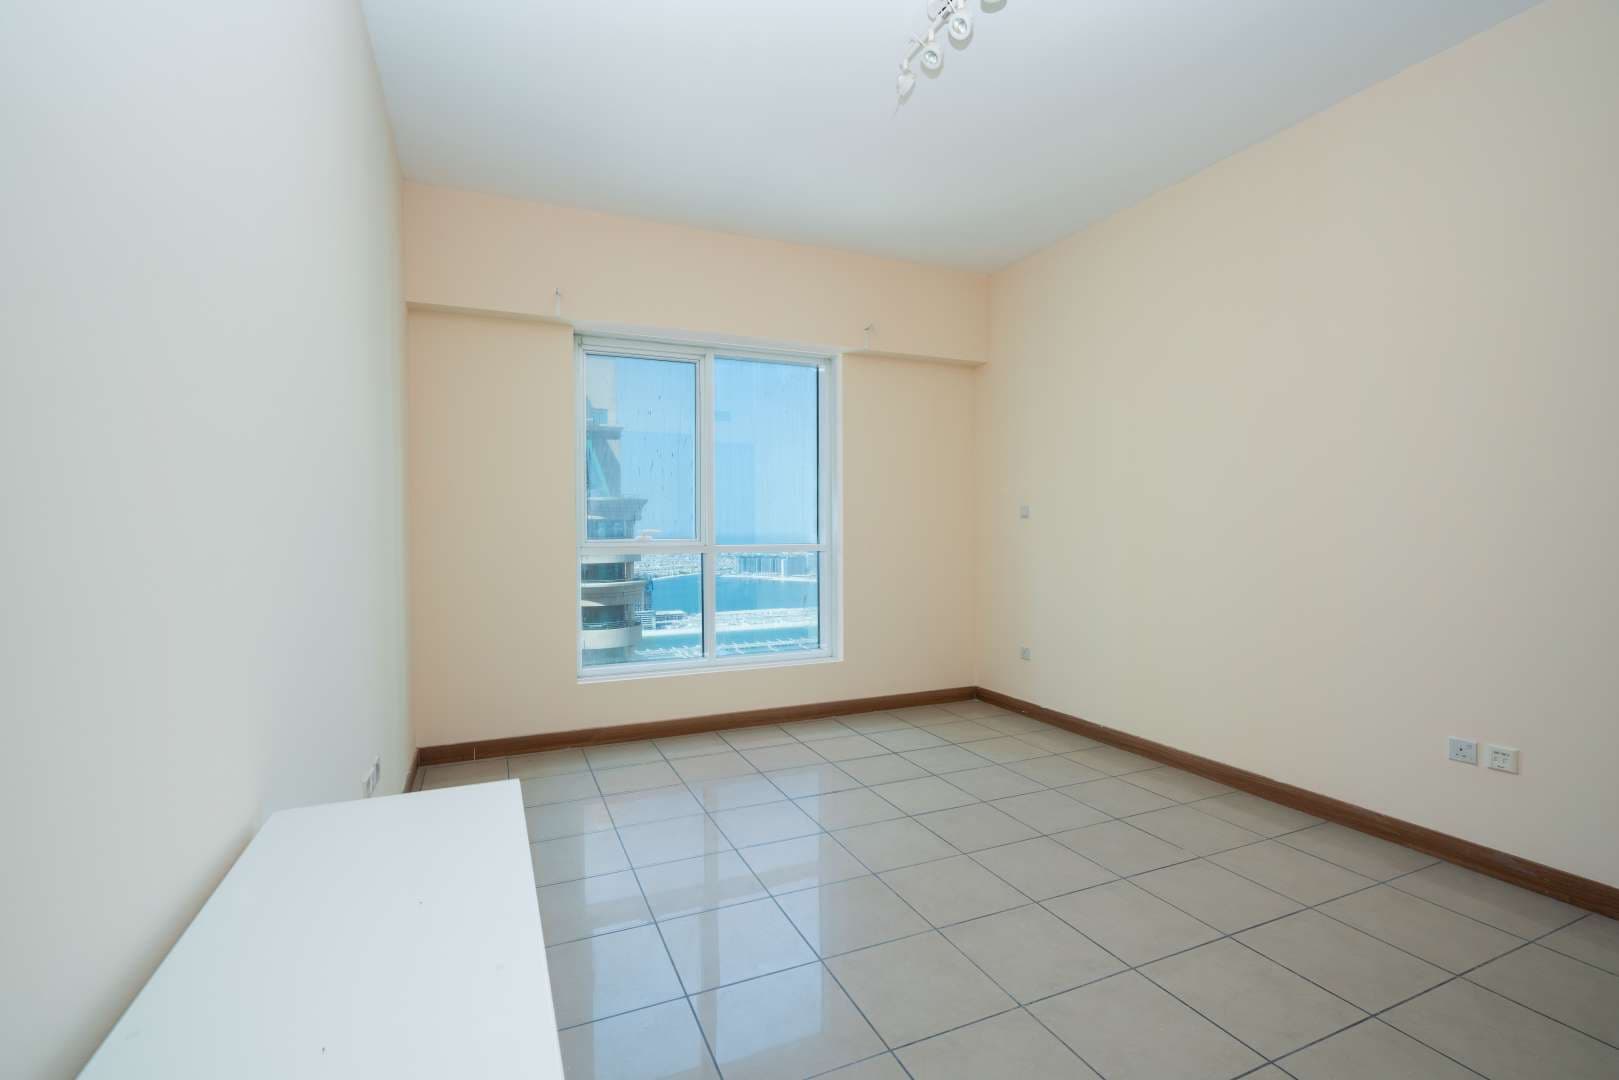 3 Bedroom Apartment For Rent Sulafa Tower Lp04976 944a484849ac980.jpg